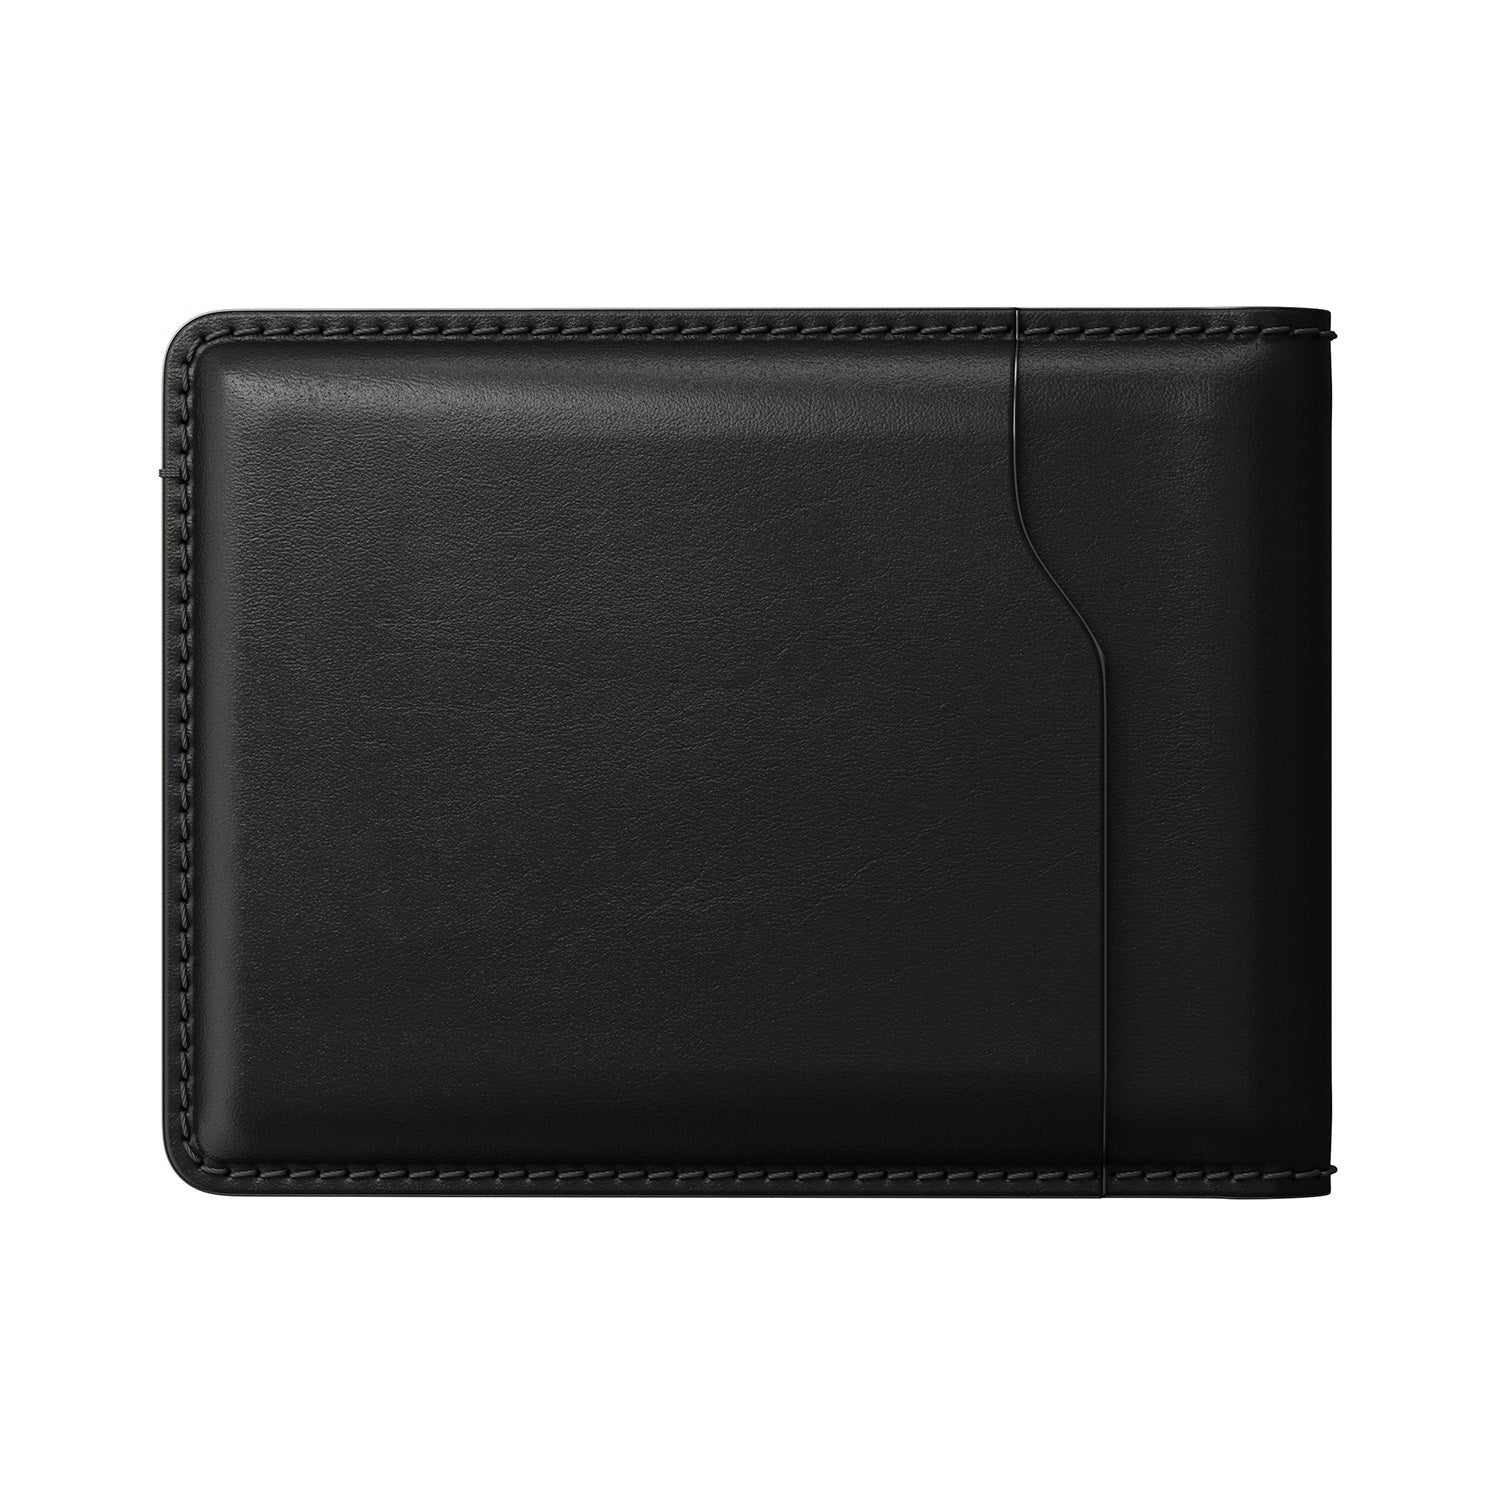 NOMAD Horween Leather Bifold Wallet Wallets & Money Clips NOMAD 